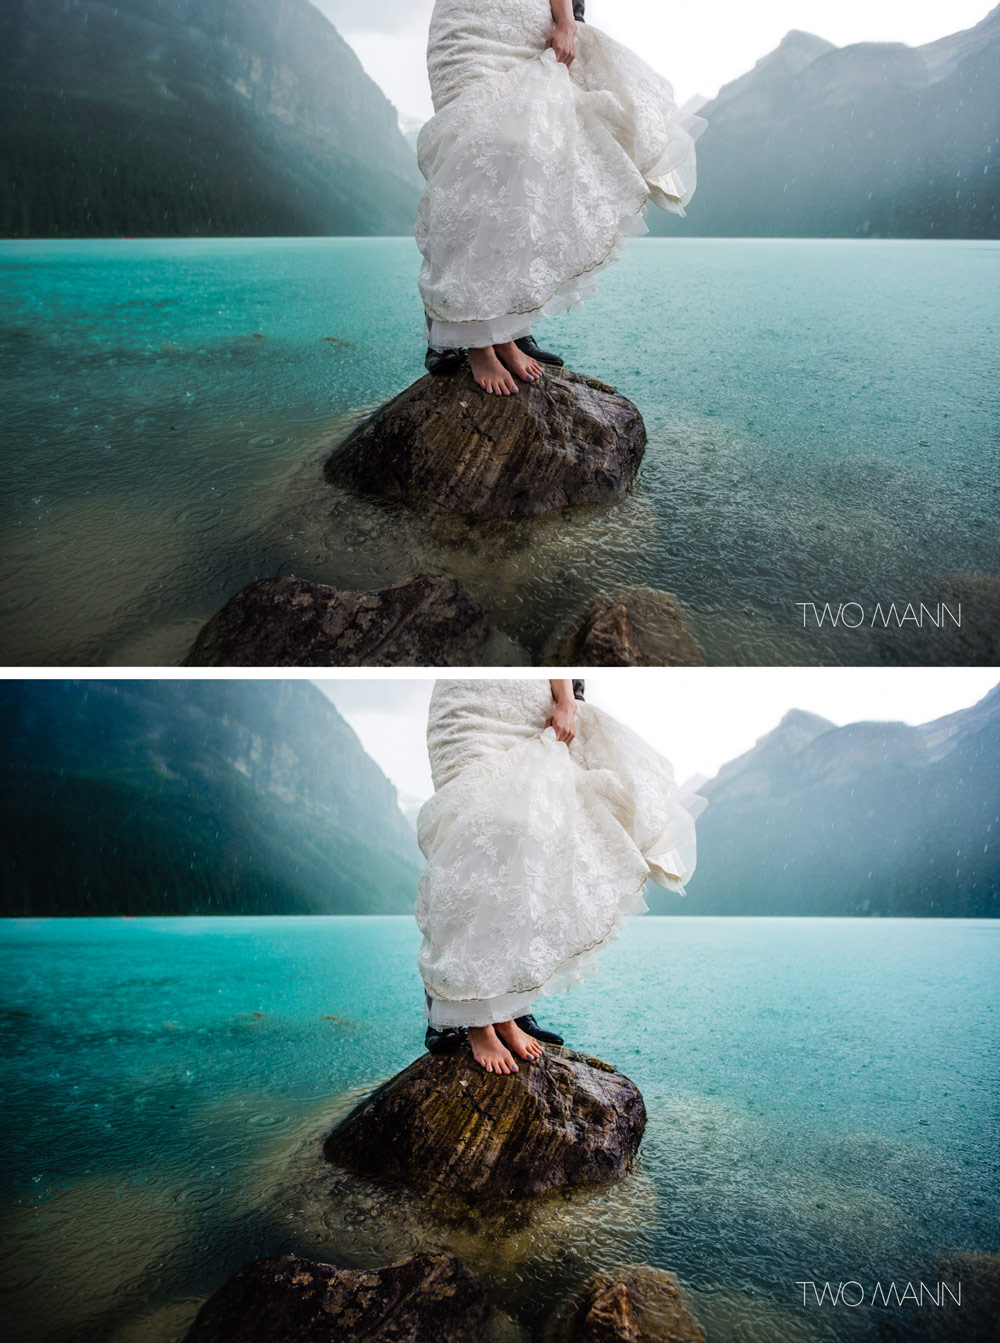 Dvlop lightroom preset sample image - Two Mann Studios. A woman in a white dress standing on a solitary rock, her legs and hand shown in the middle of turquise water, mountains in the background